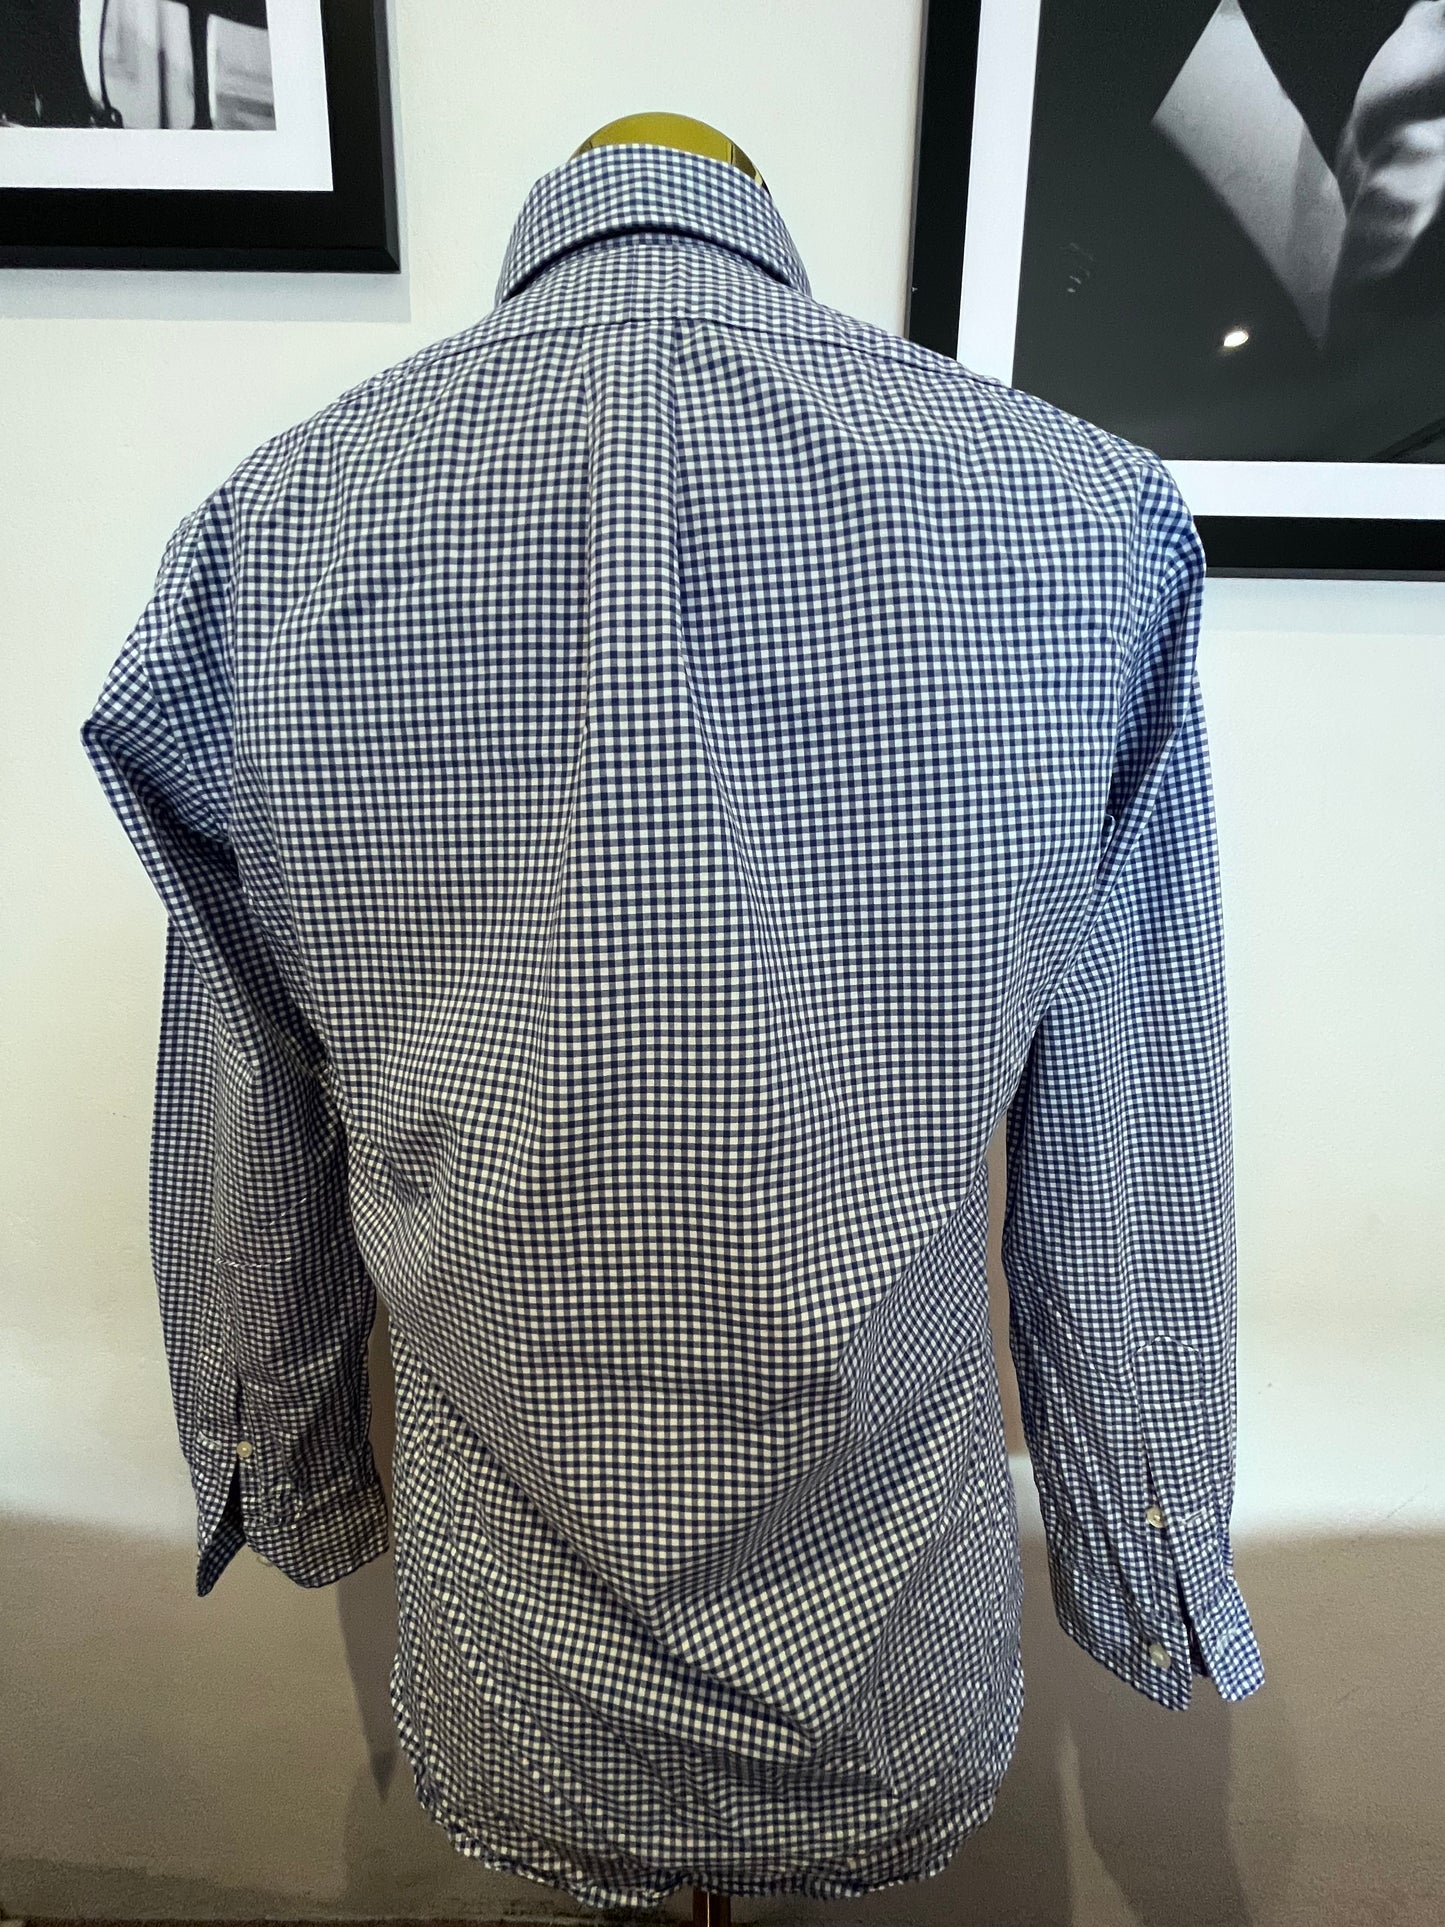 Ralph Lauren 100% Cotton Blue White Gingham Check Size Small Classic Fit